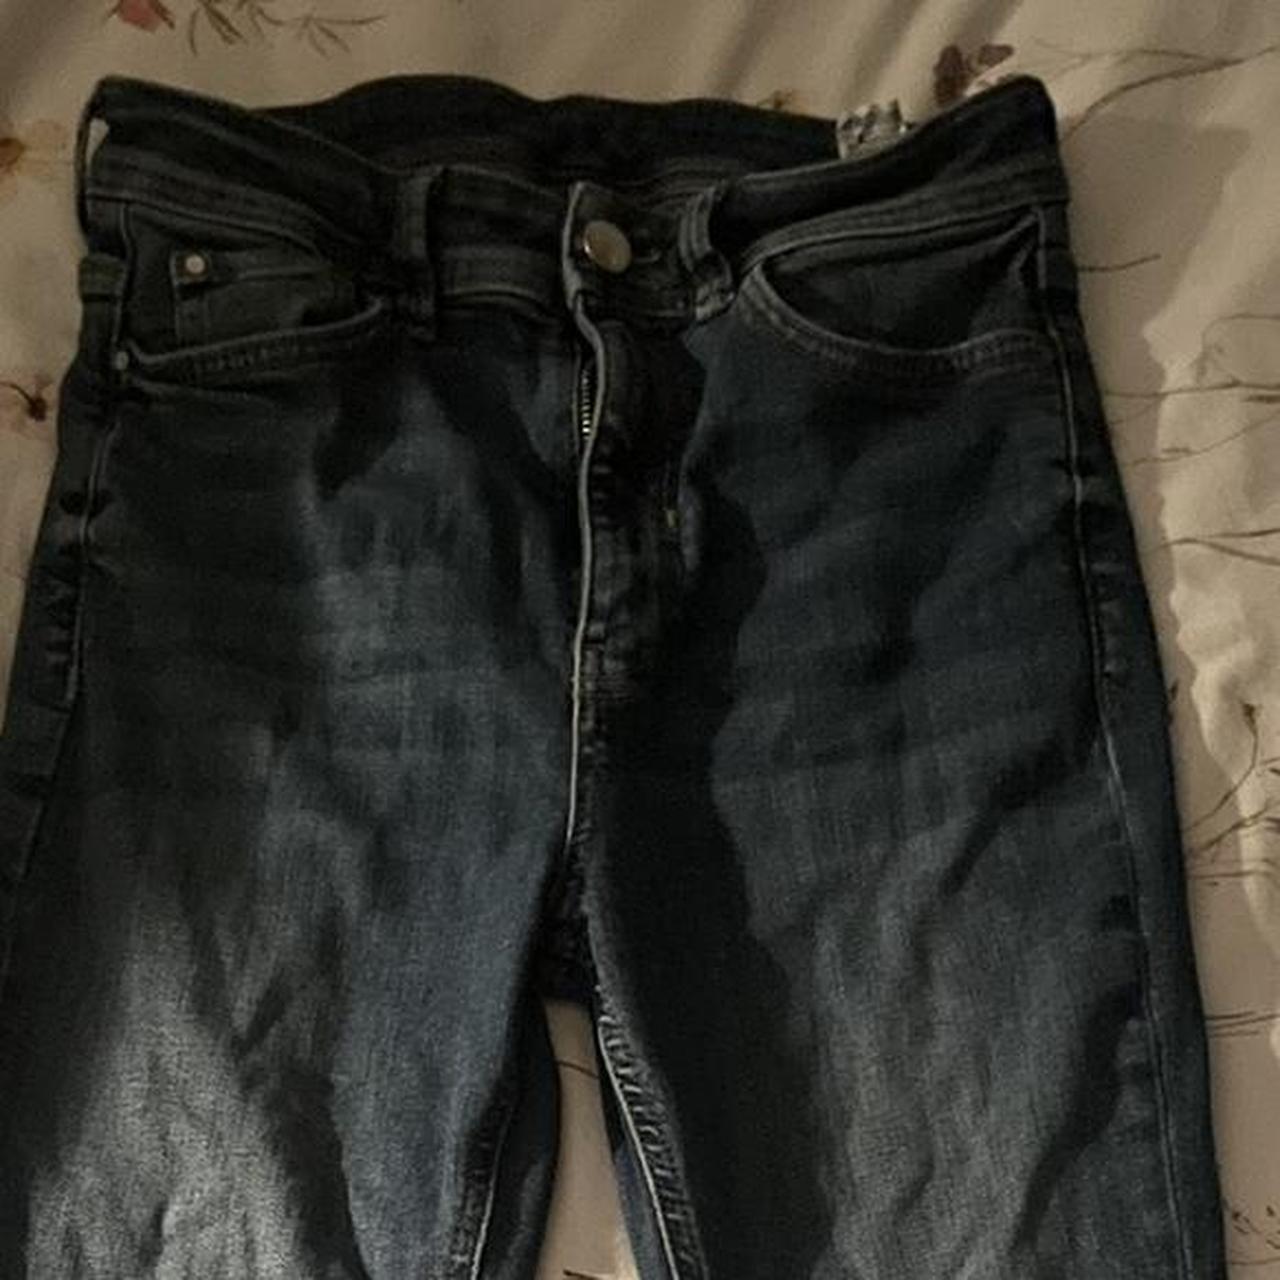 Size 8-10 flared bootcut jeans - Depop